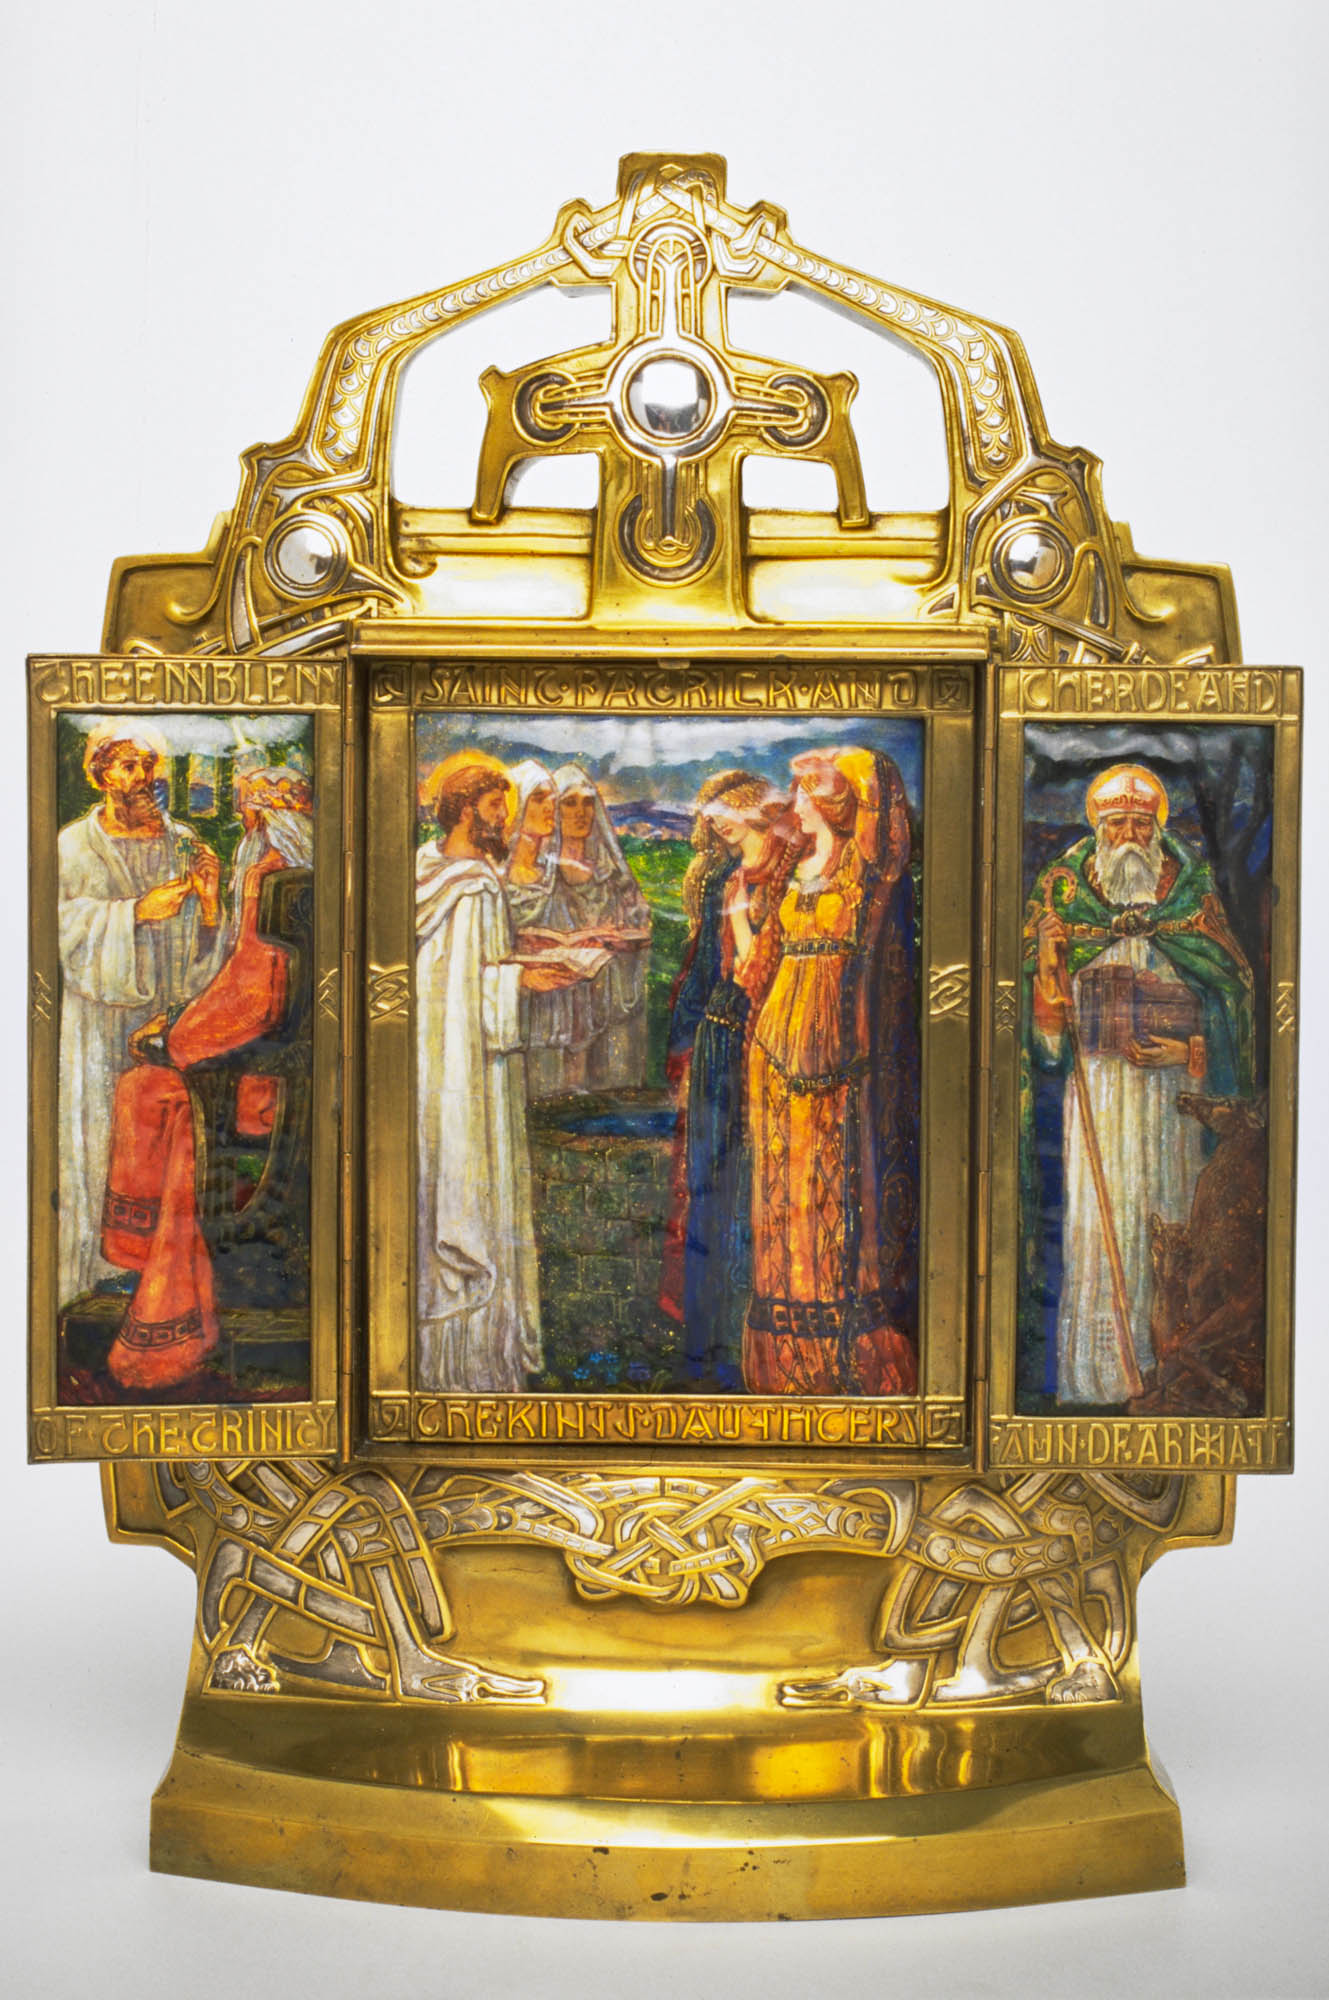 Golden triptych with interlace decorations on top and bottom with three paintings of figures in colourful robes.